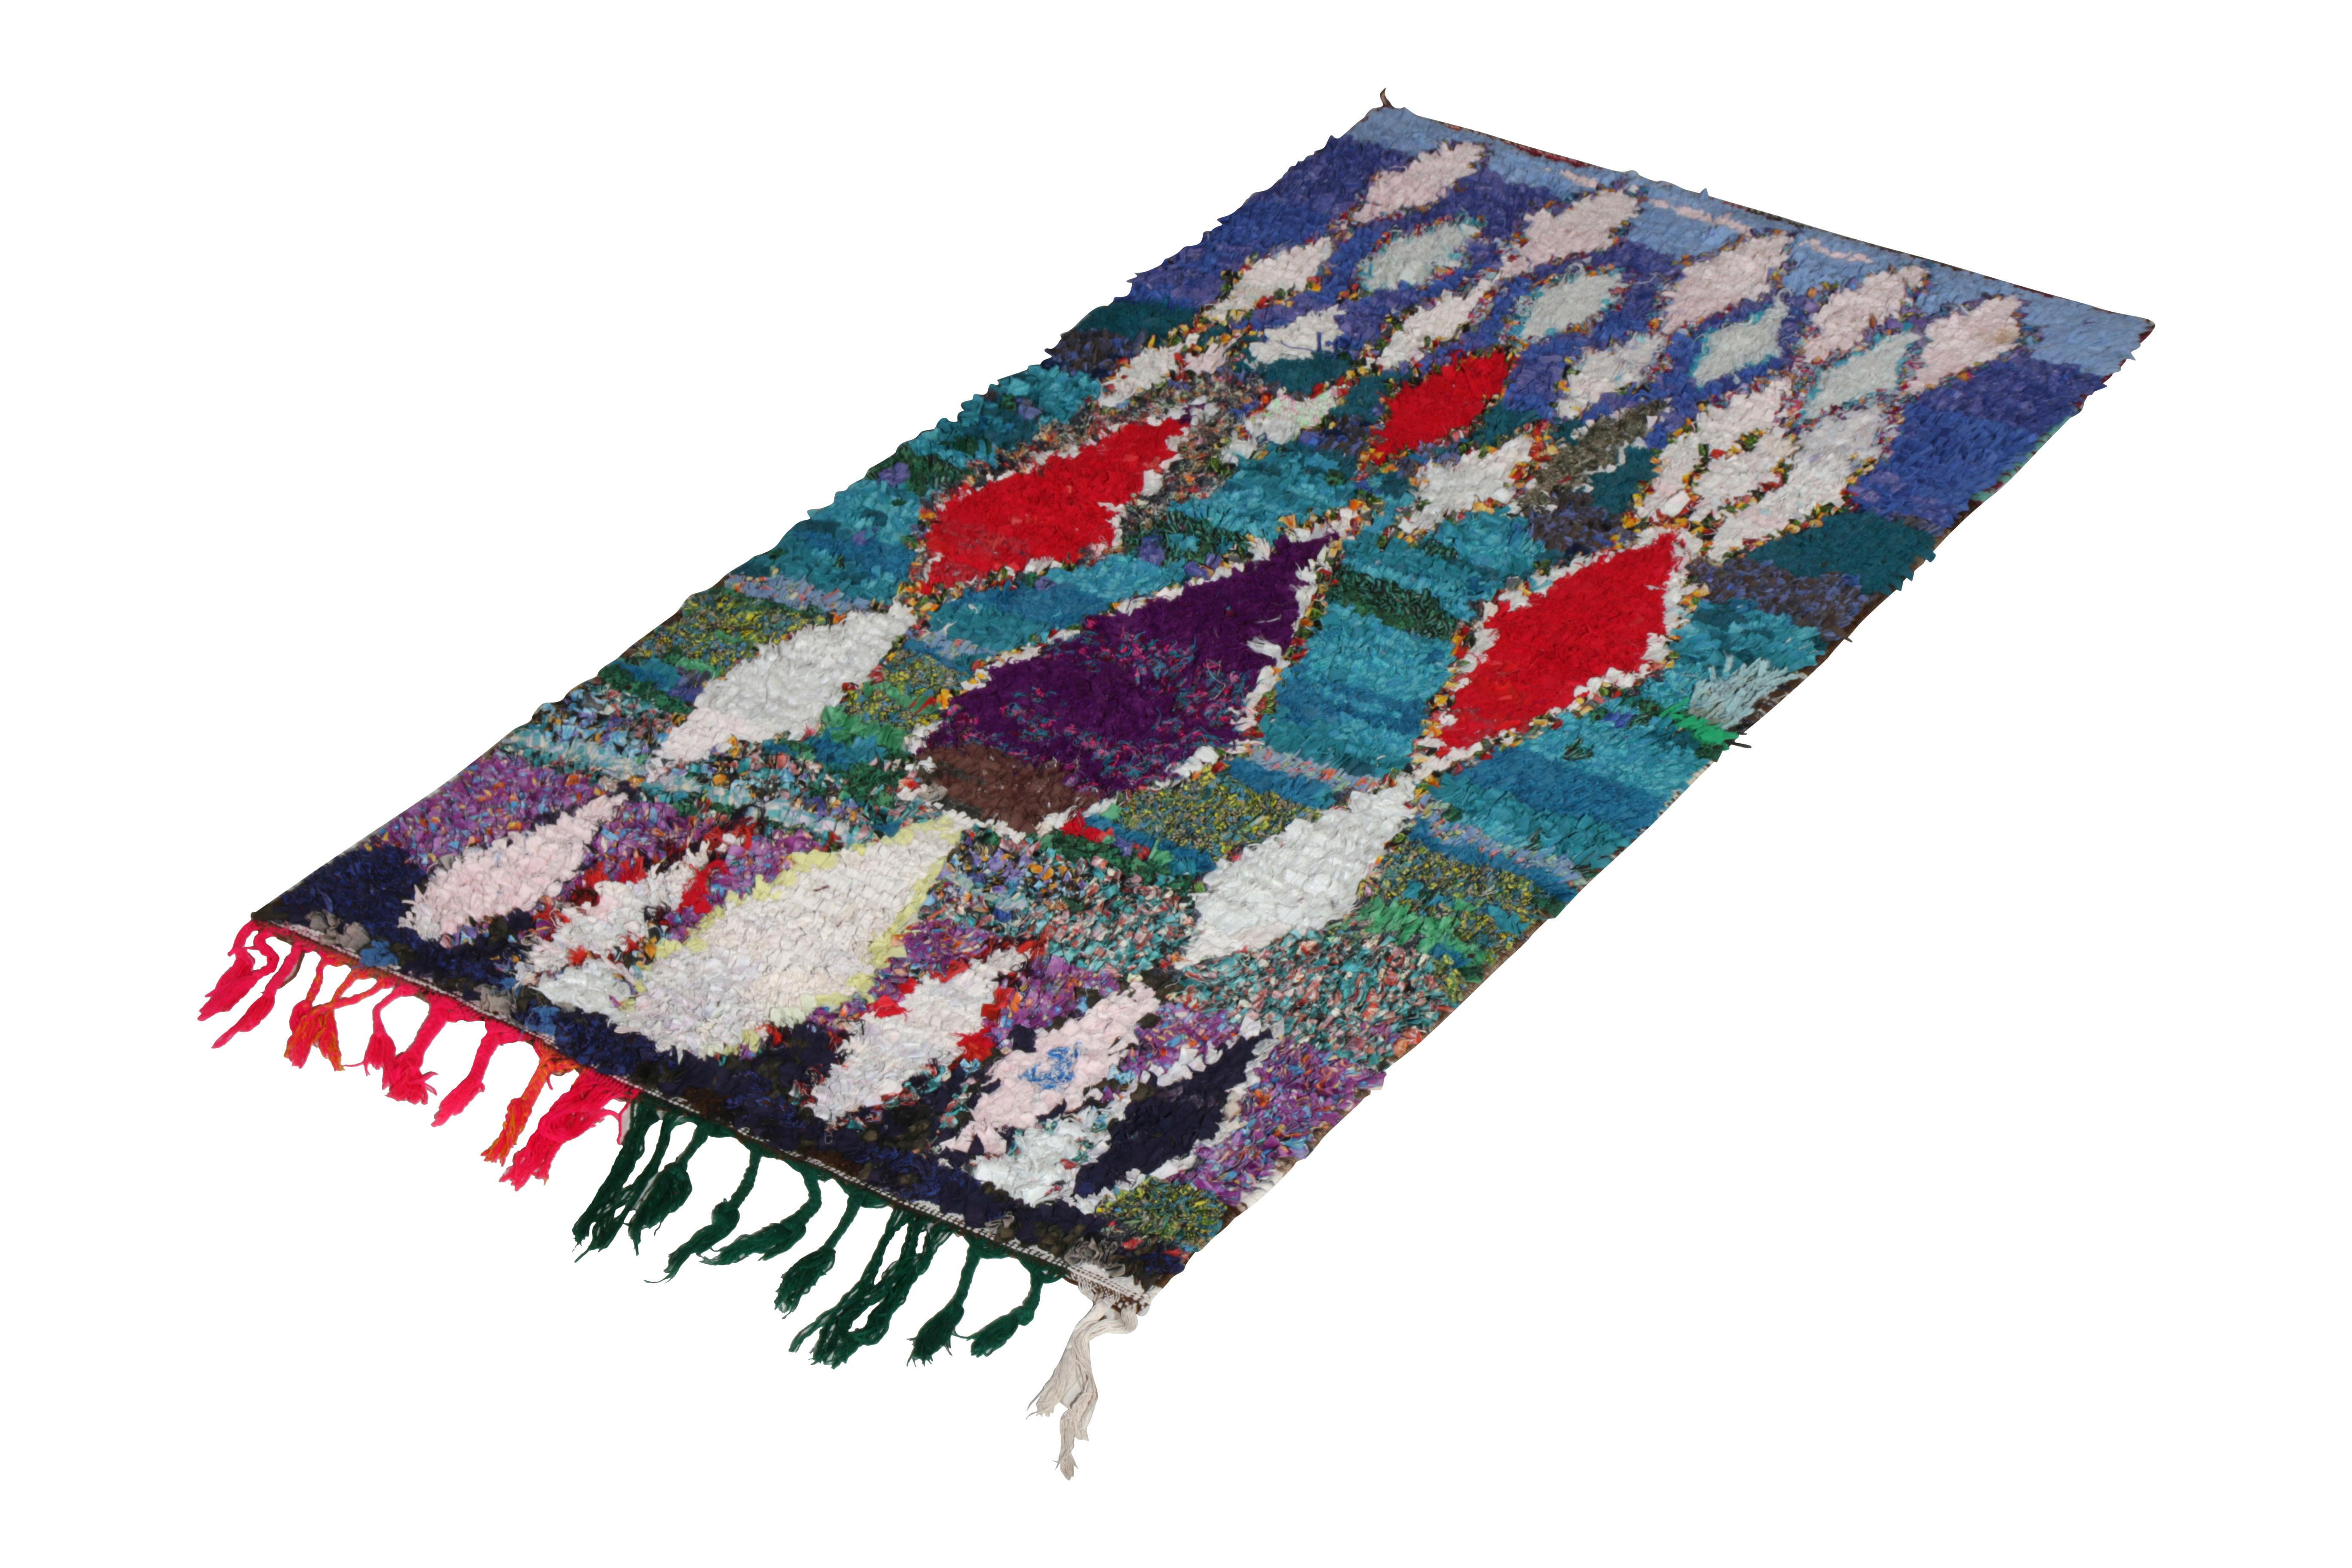 A colorful addition to the home, this vintage Moroccan wool rug was handmade circa 1950-1960, idealizing the Berber tribal rug style. This particular edition of the mid-century vintage Moroccan rug relies on blue, red, and purple fabric creating